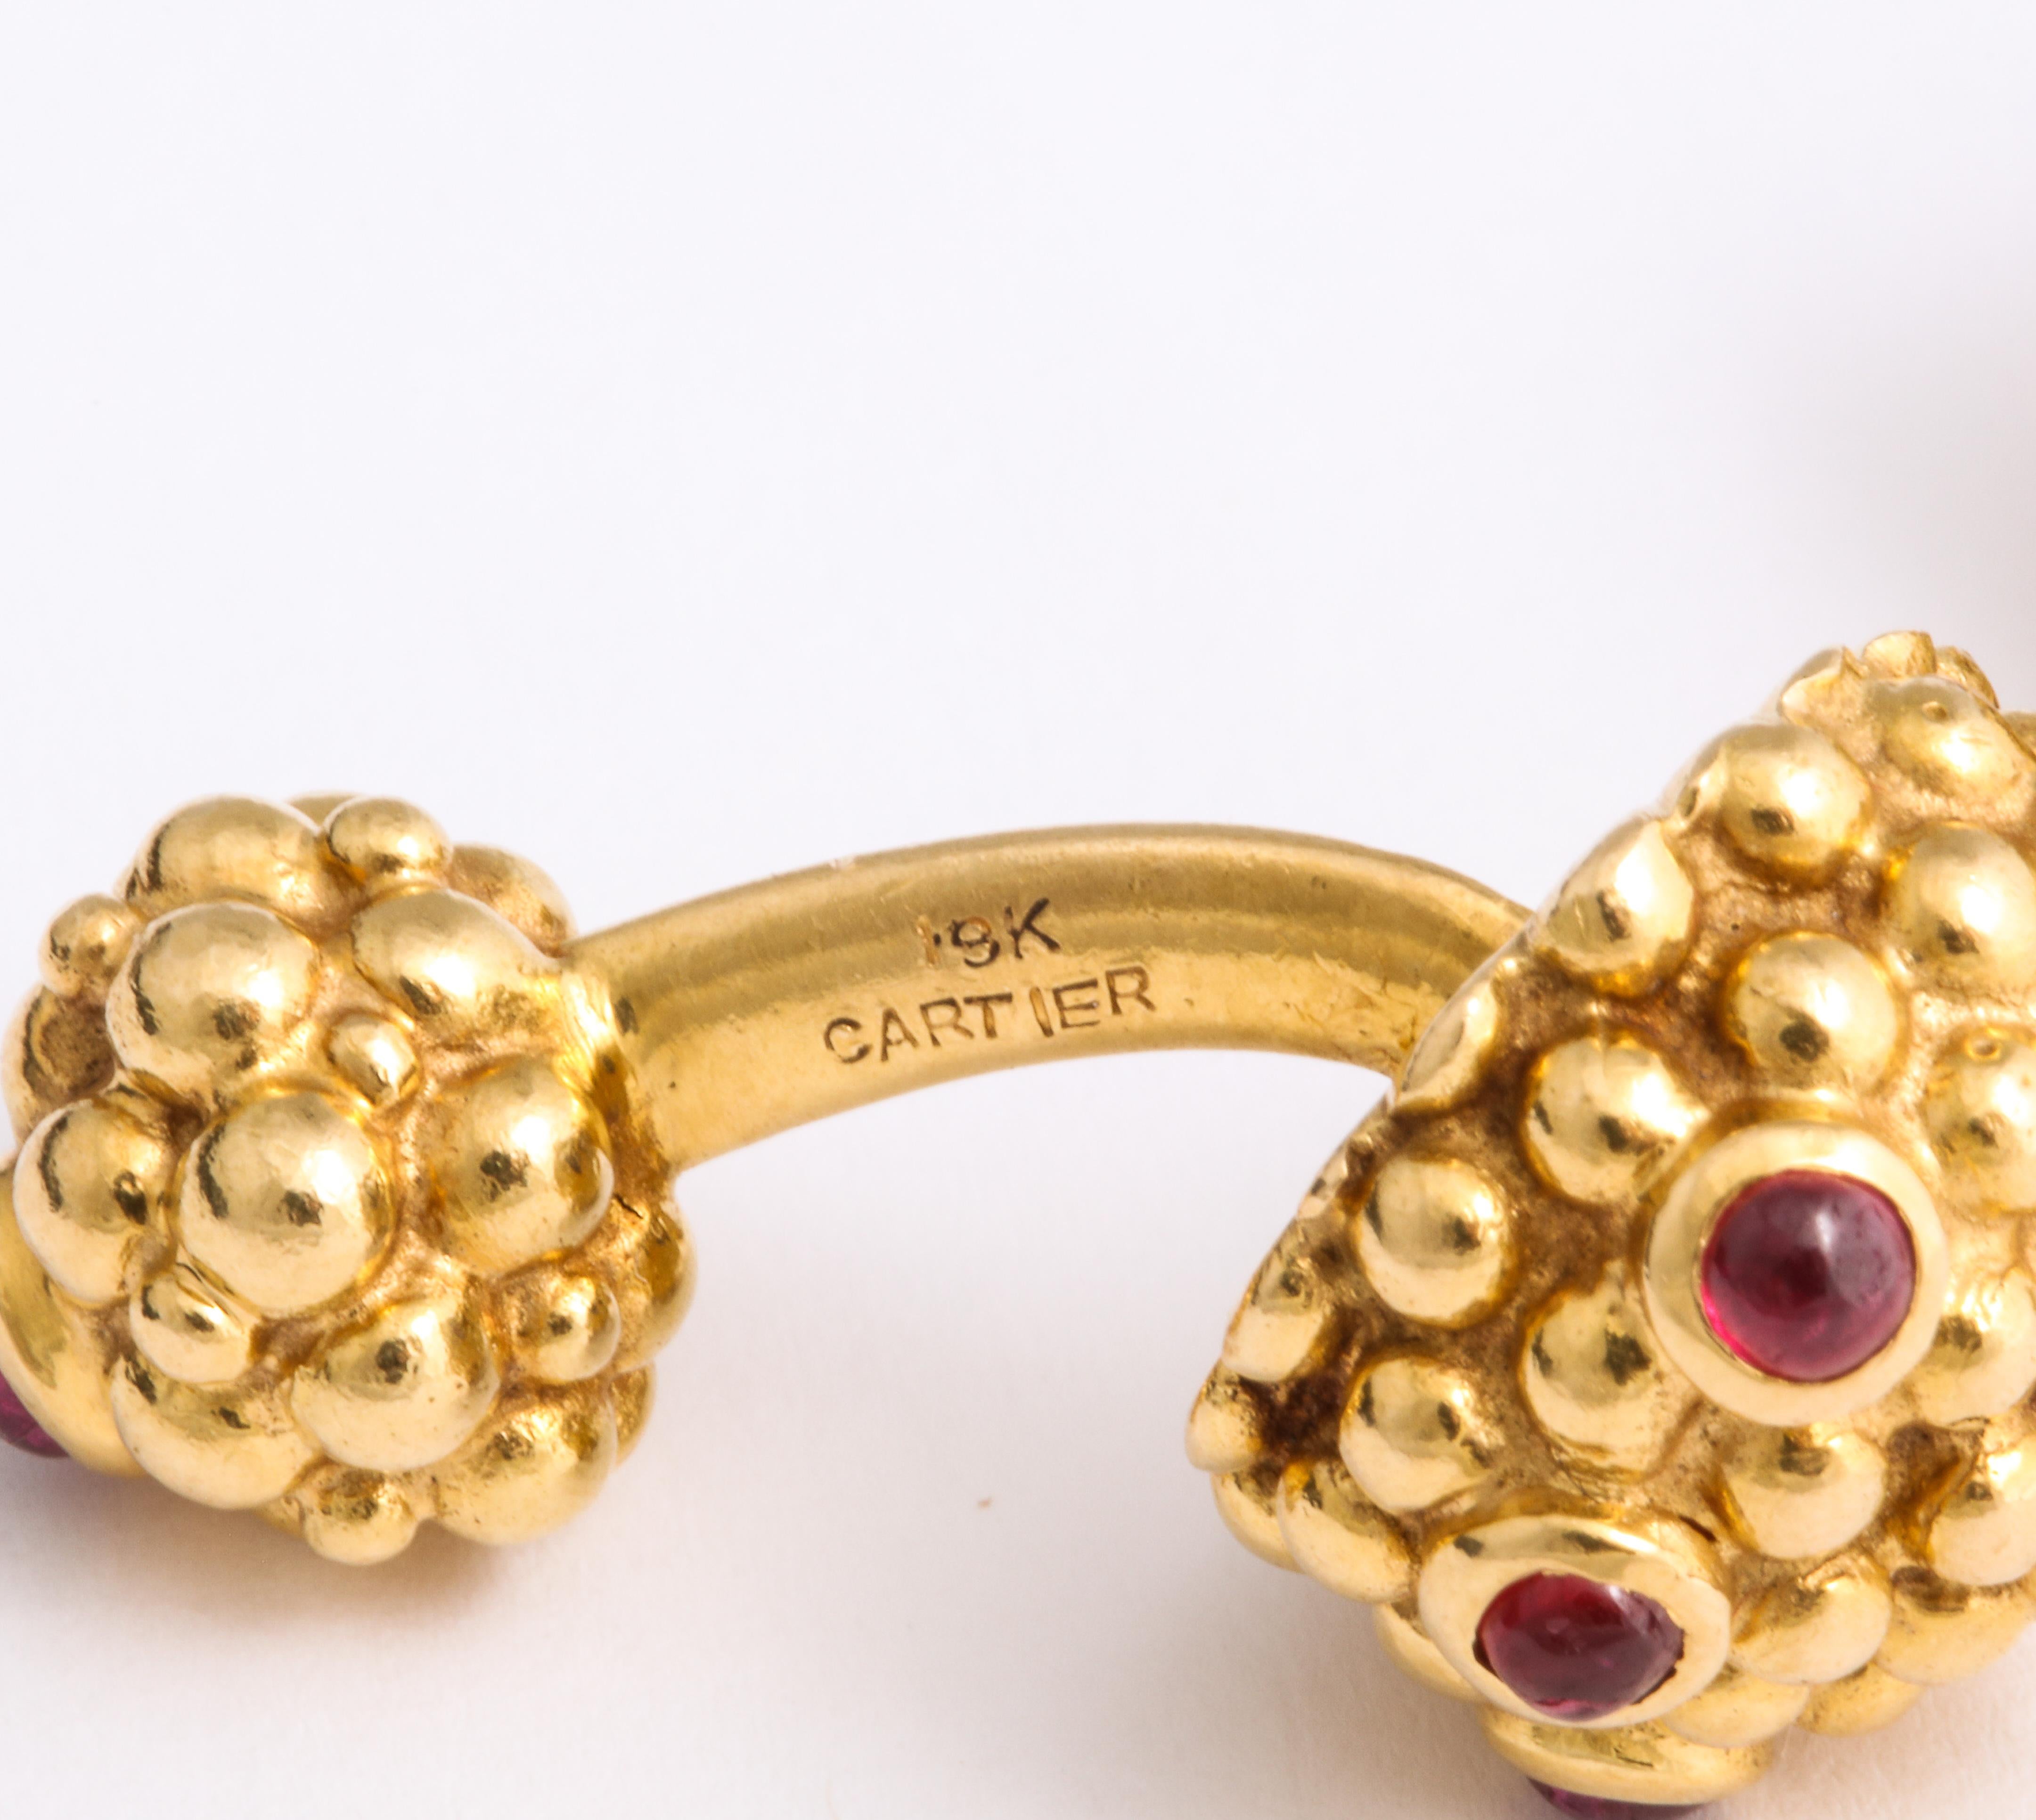 Cartier Yellow Gold and Ruby Cufflinks 2